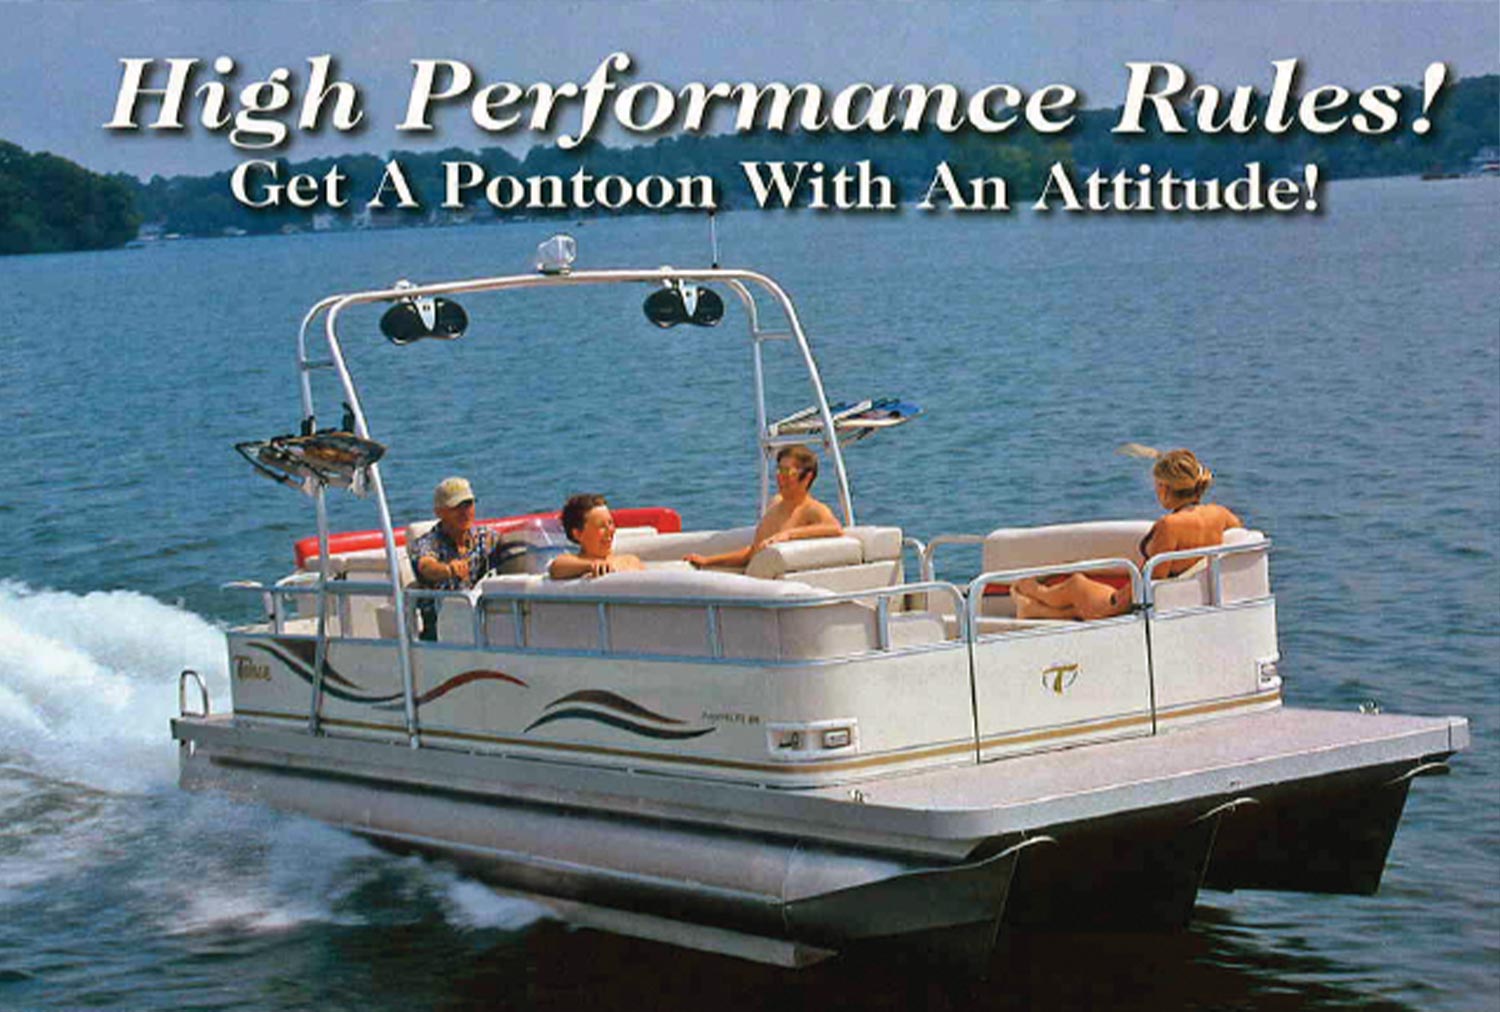 the words "High Performance Rules! Get a Pontoon with attitude!" imposed on an image of a family relaxing on a pontoon